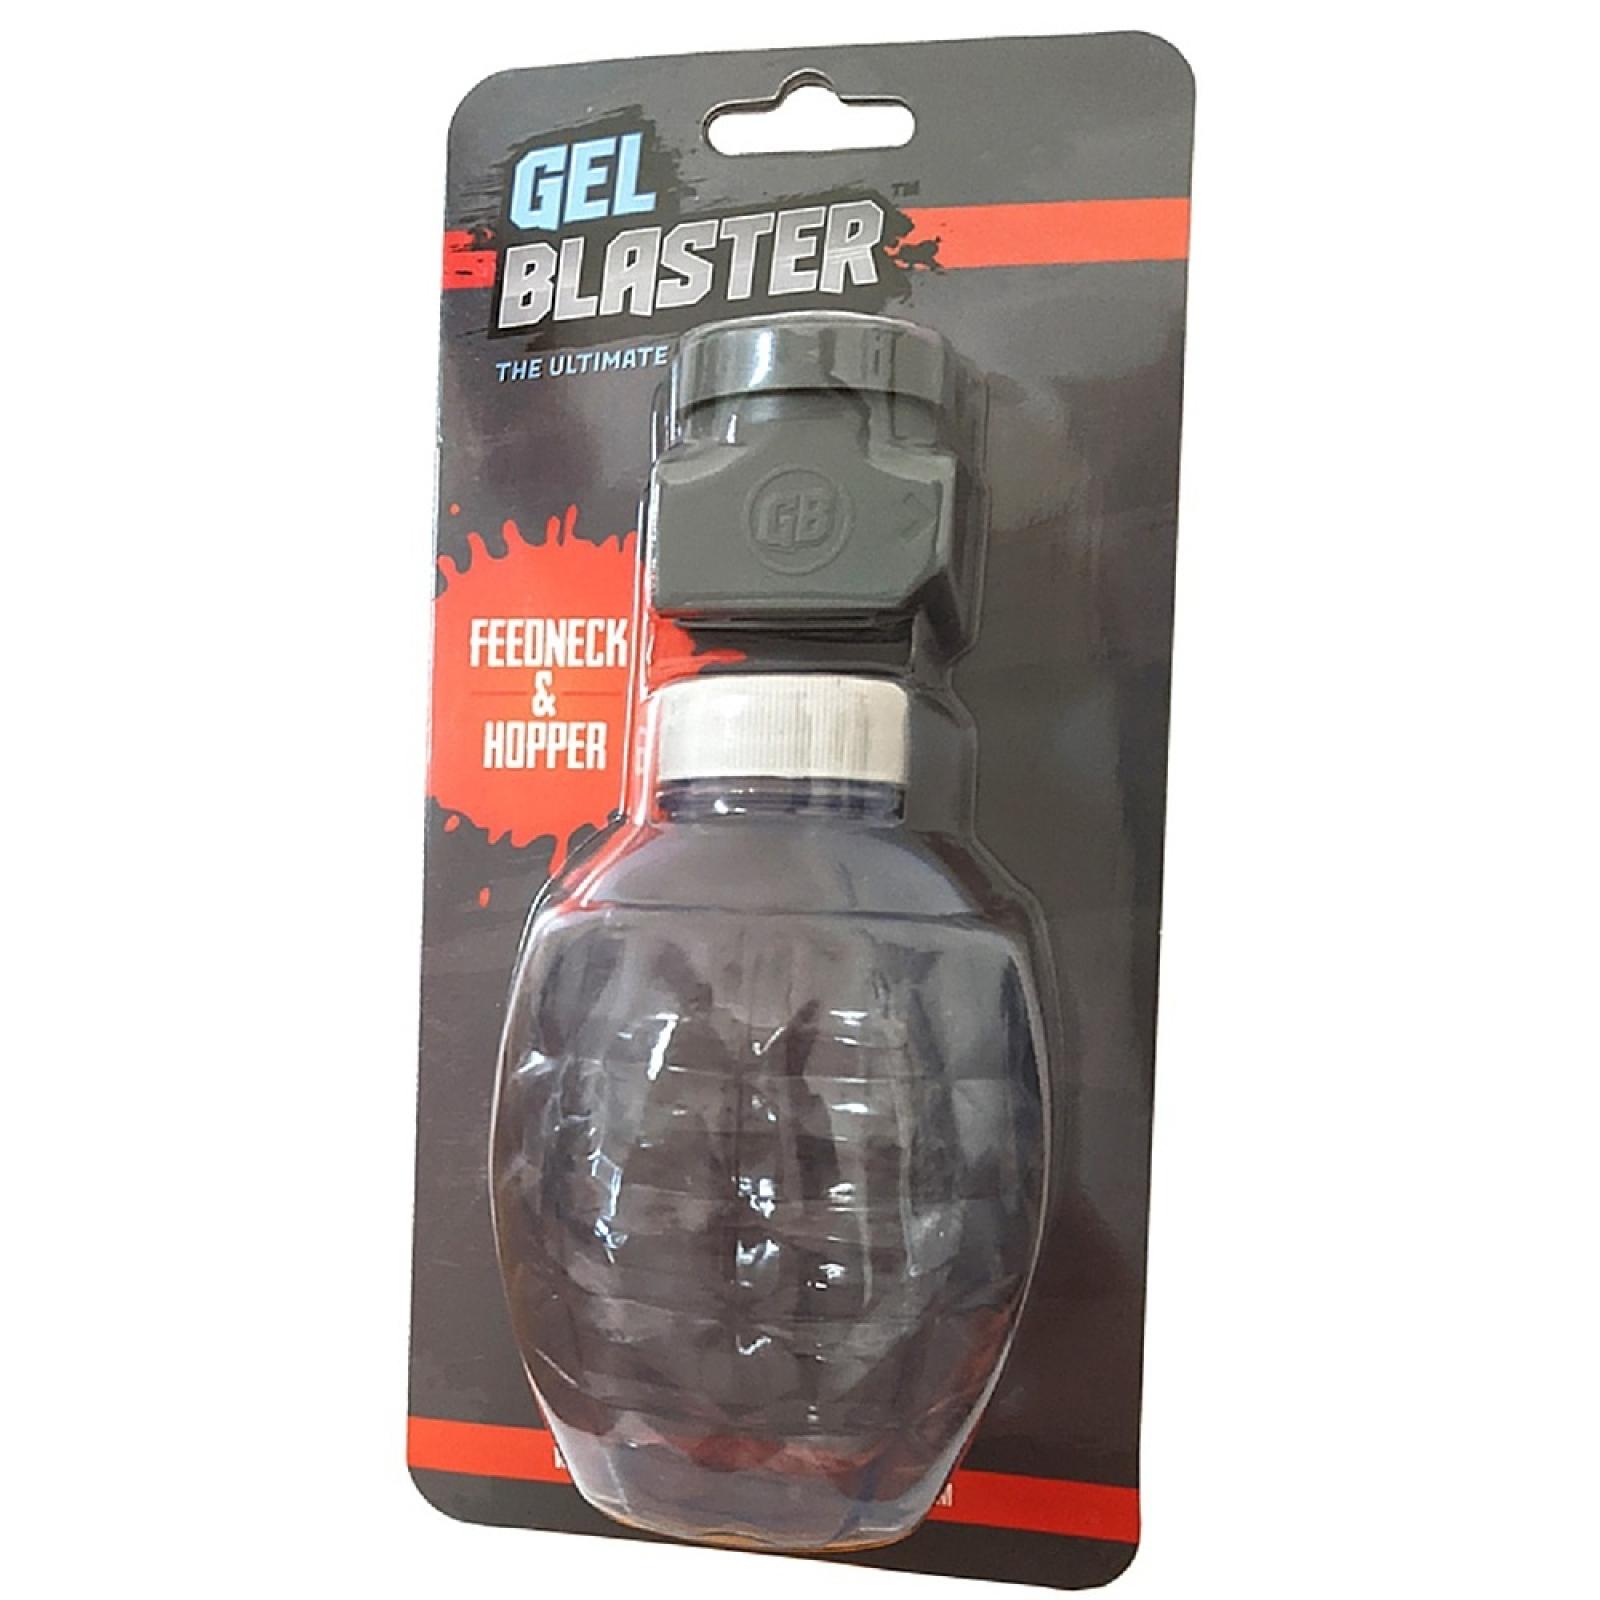 Gel Blaster Surge Replacement Hopper and Feedneck